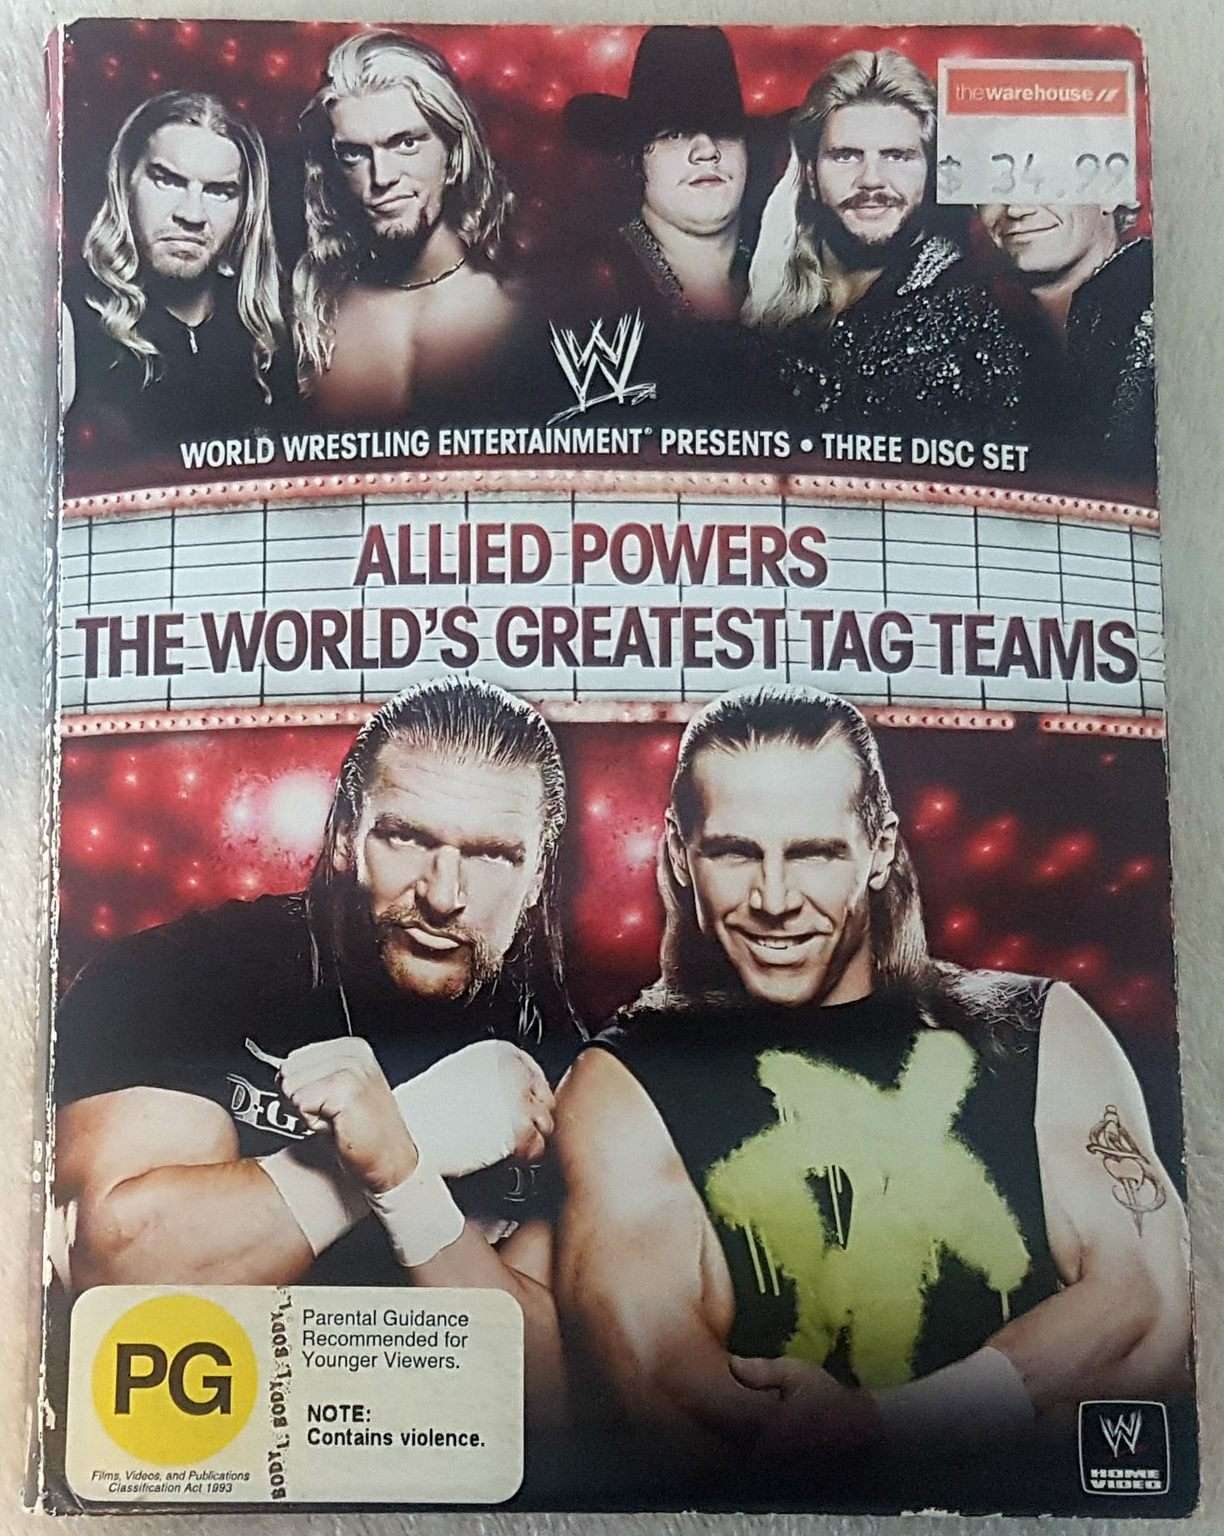 WWE: Allied Powers The World's Greatest Tag Teams 3 Disc Set